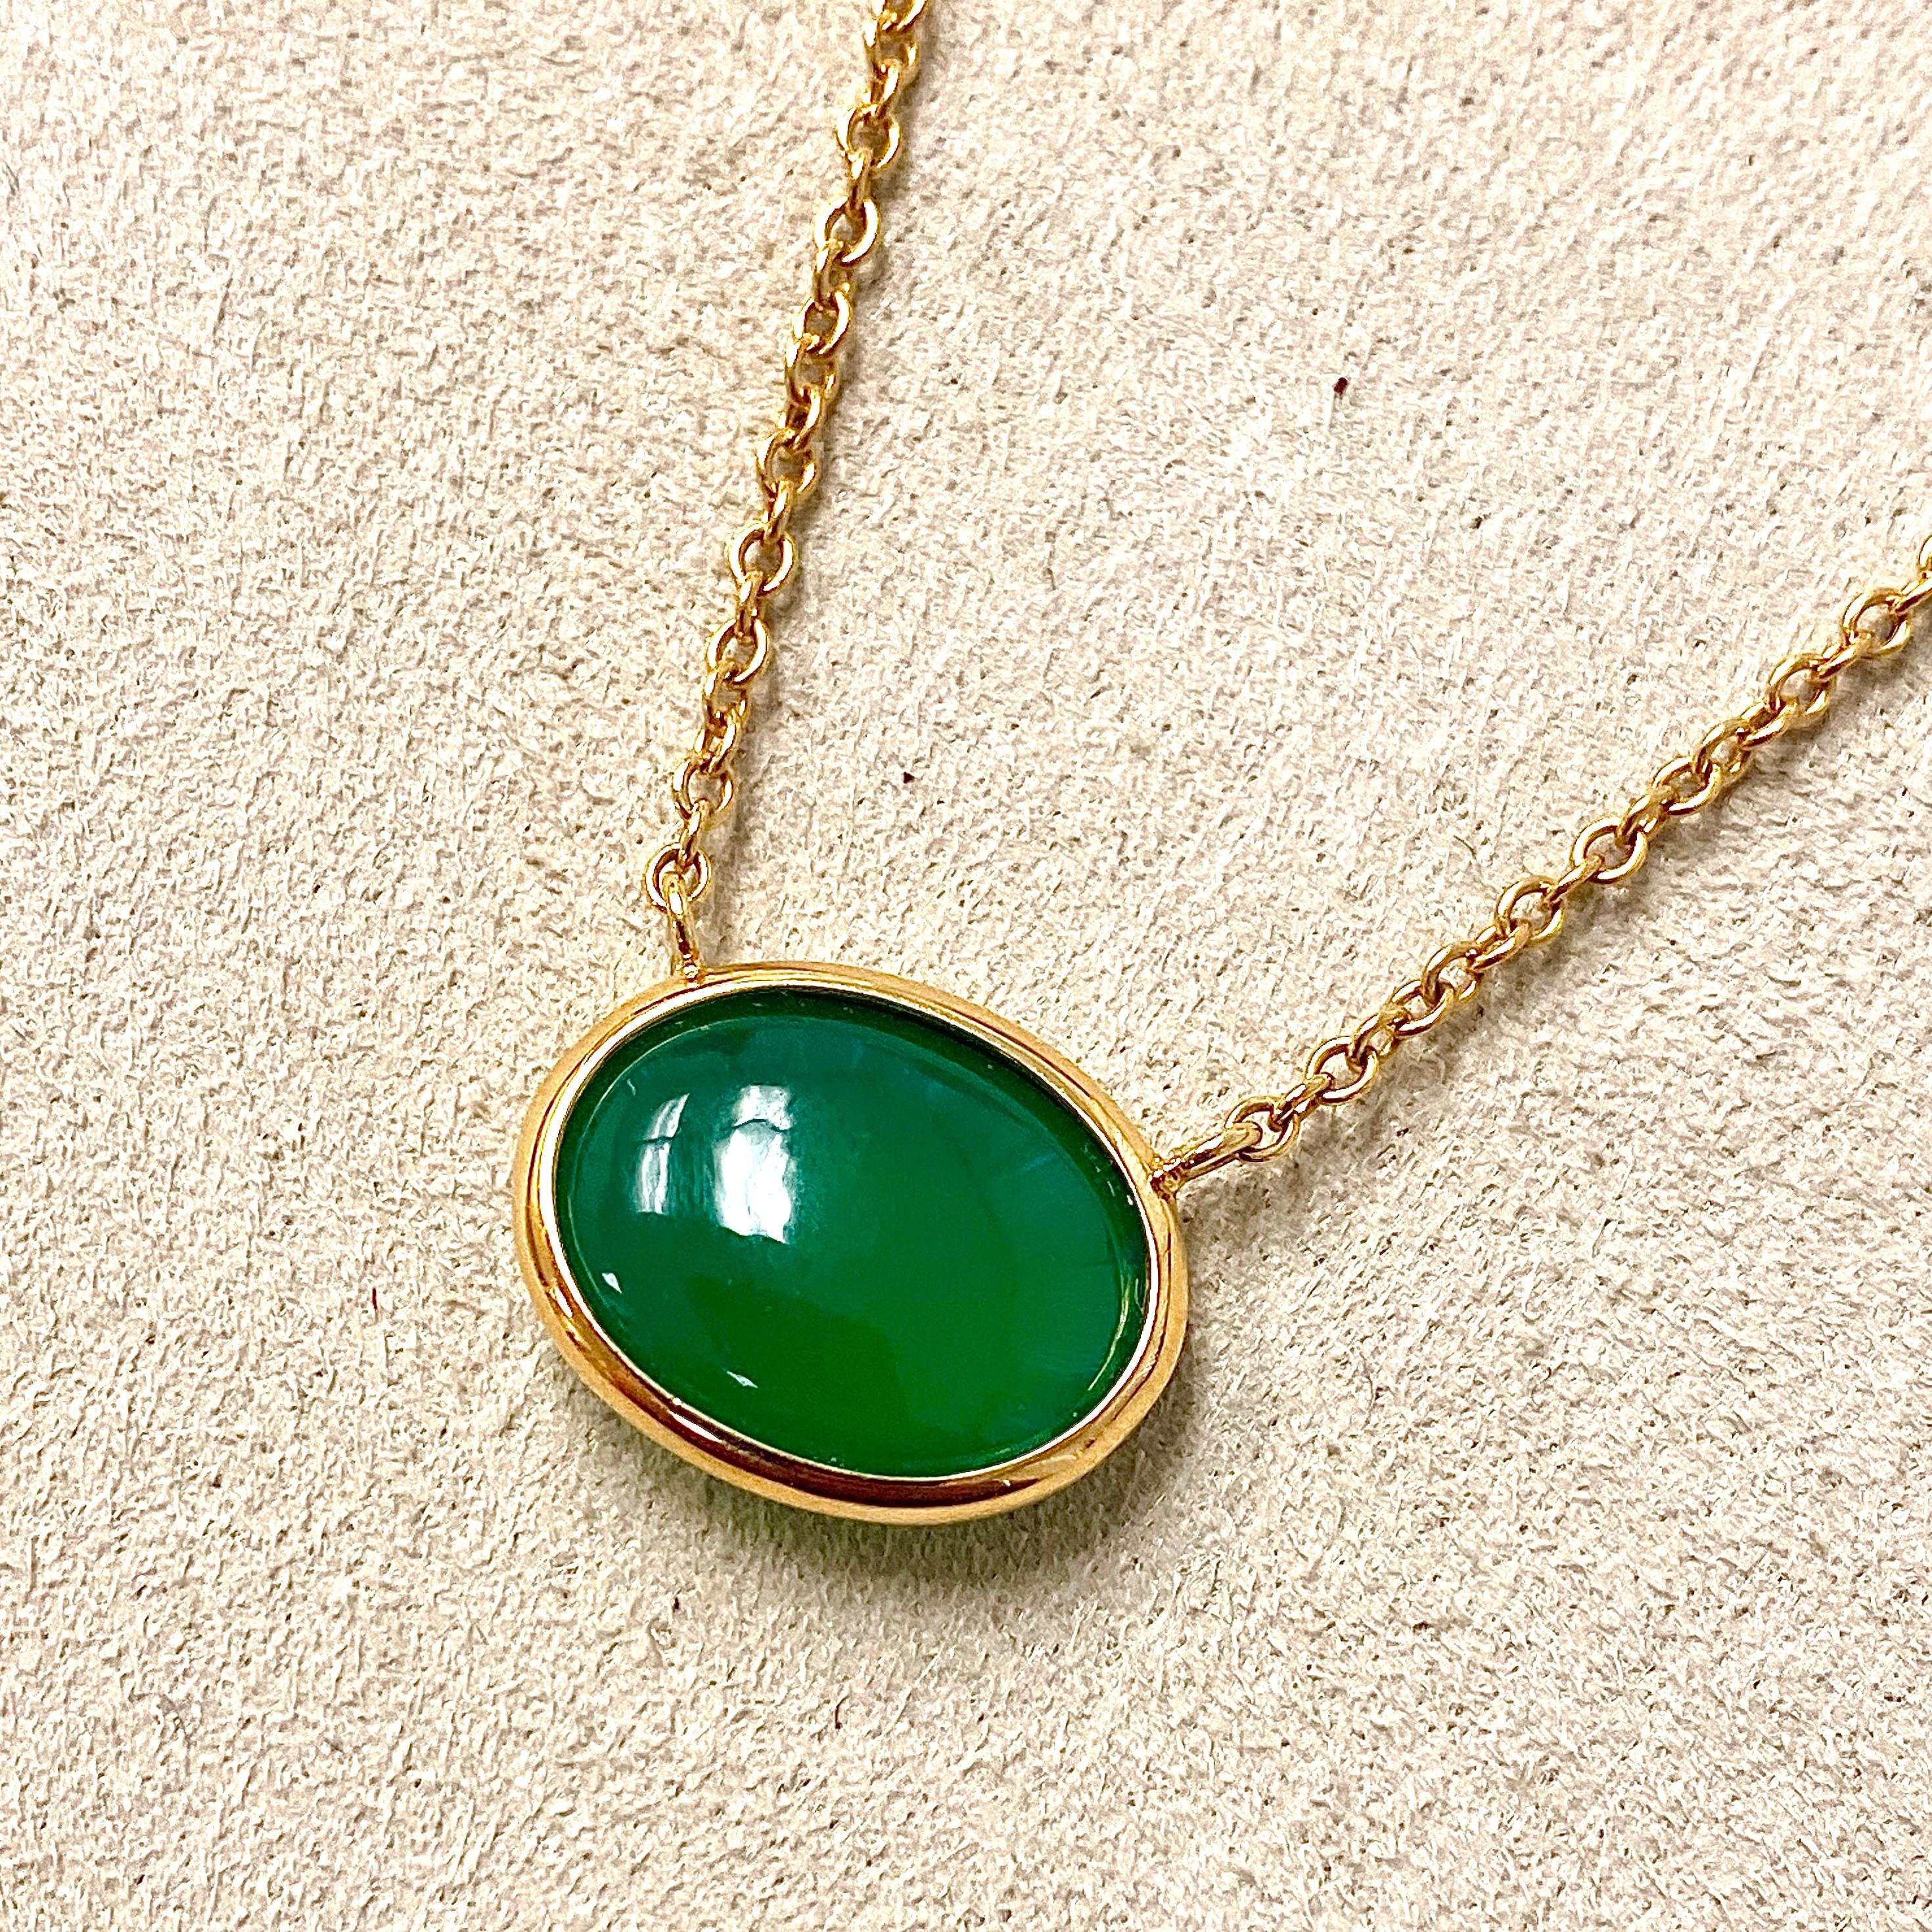 Created in 18 karat yellow gold
Green Chalcedony 7 cts approx
18kyg 18 inch chain with small lobster lock
Chain loops at 17th and 16th inch

Exquisitely handcrafted in luminous 18 karat yellow gold, this stunning necklace boasts a Green Chalcedony